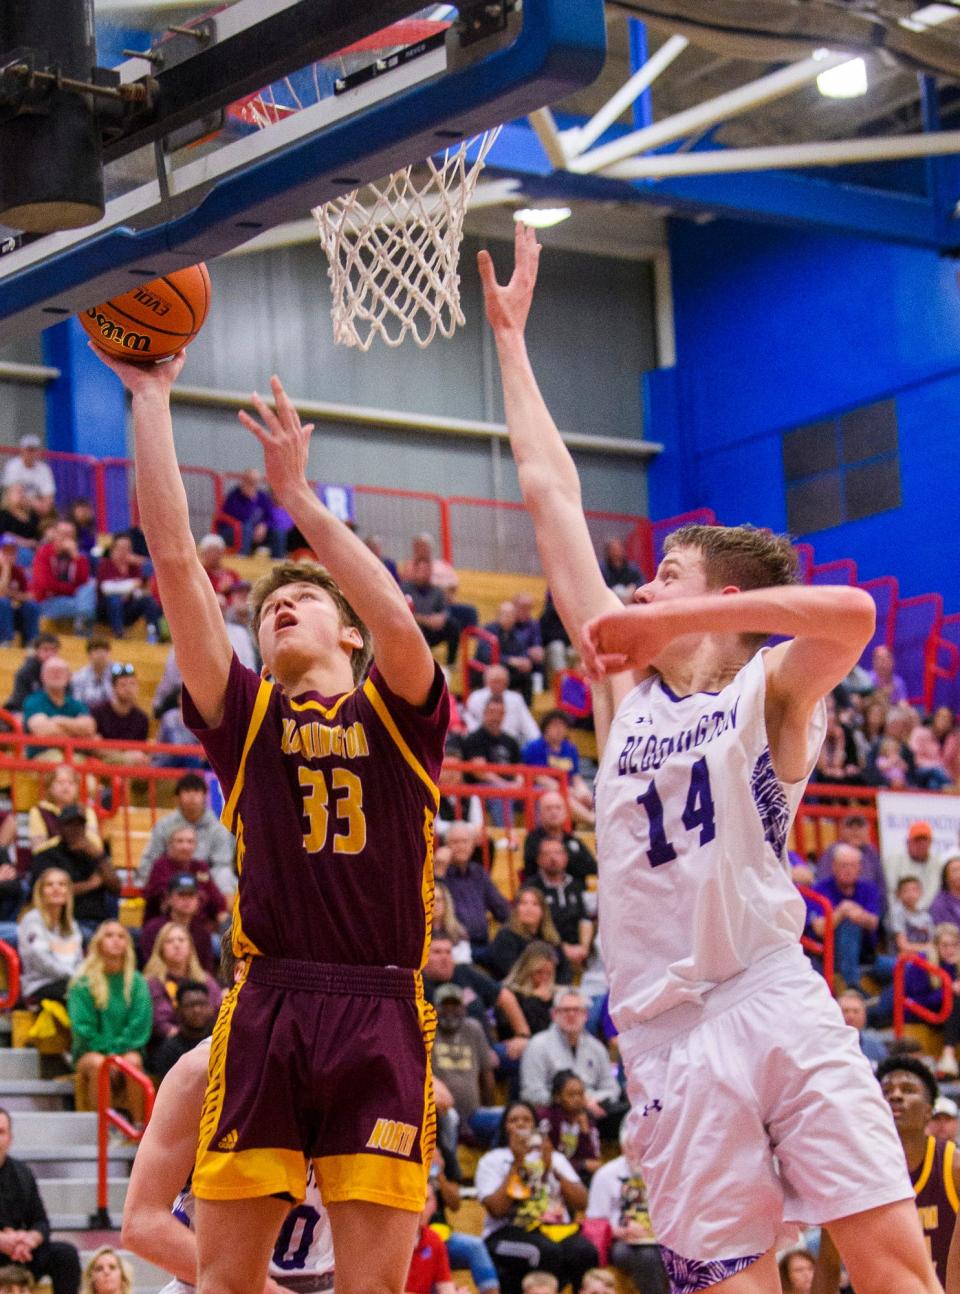 North's Lucas Vencel (33) shoots in front of South's Gavin Wisley (14) during the Bloomington North versus Bloomington South boys basketball sectional final at Martinsville High School on Saturday, March 5, 2022.